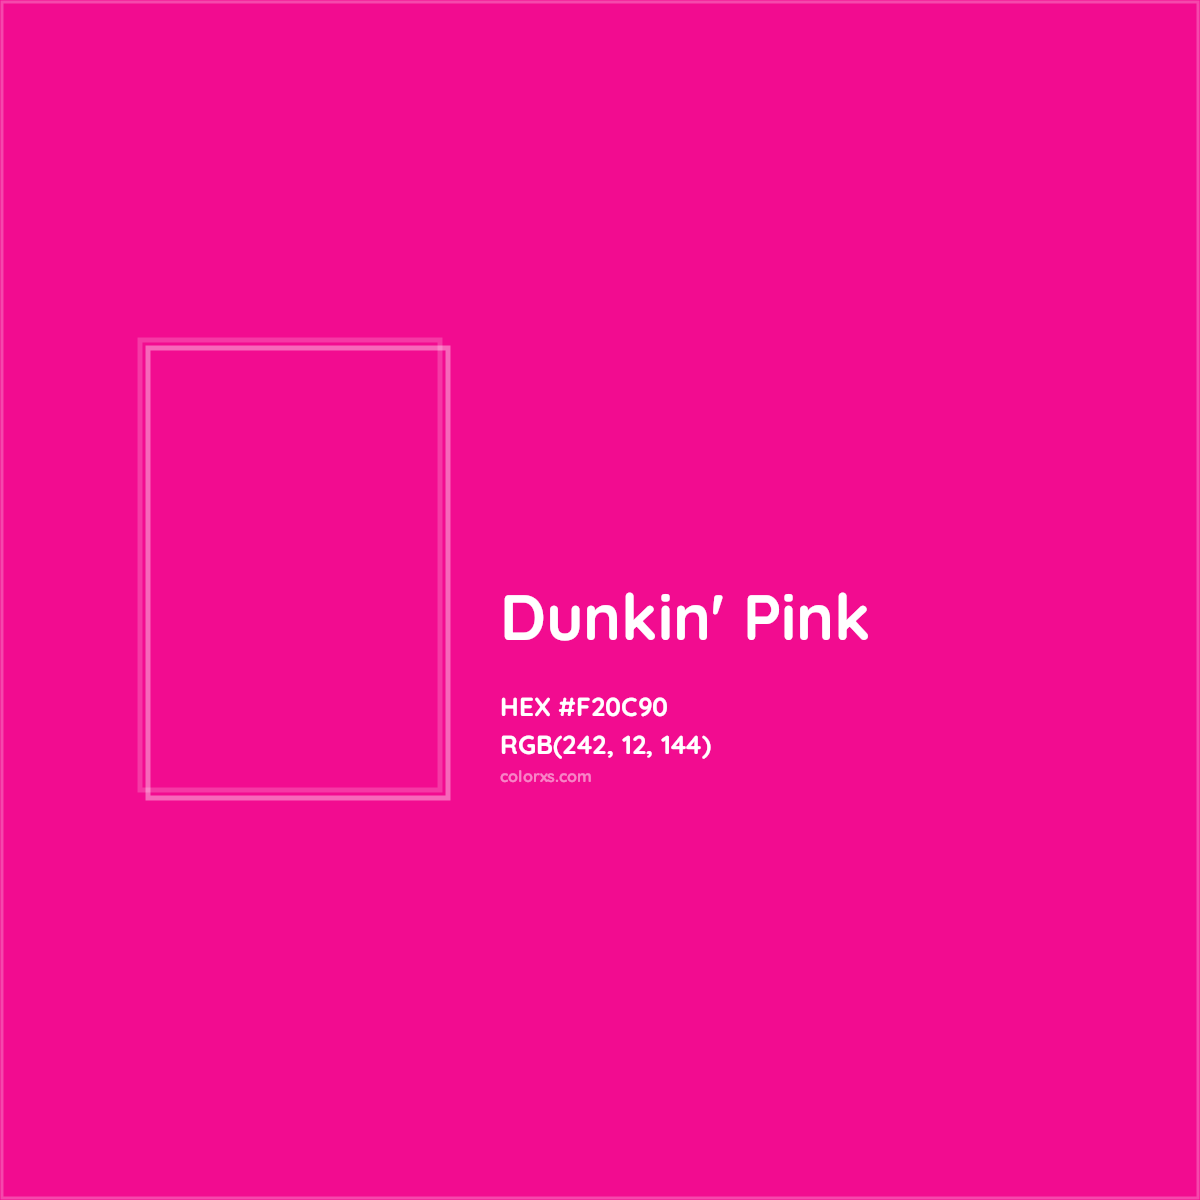 HEX #F20C90 Dunkin' Pink Other Brand - Color Code